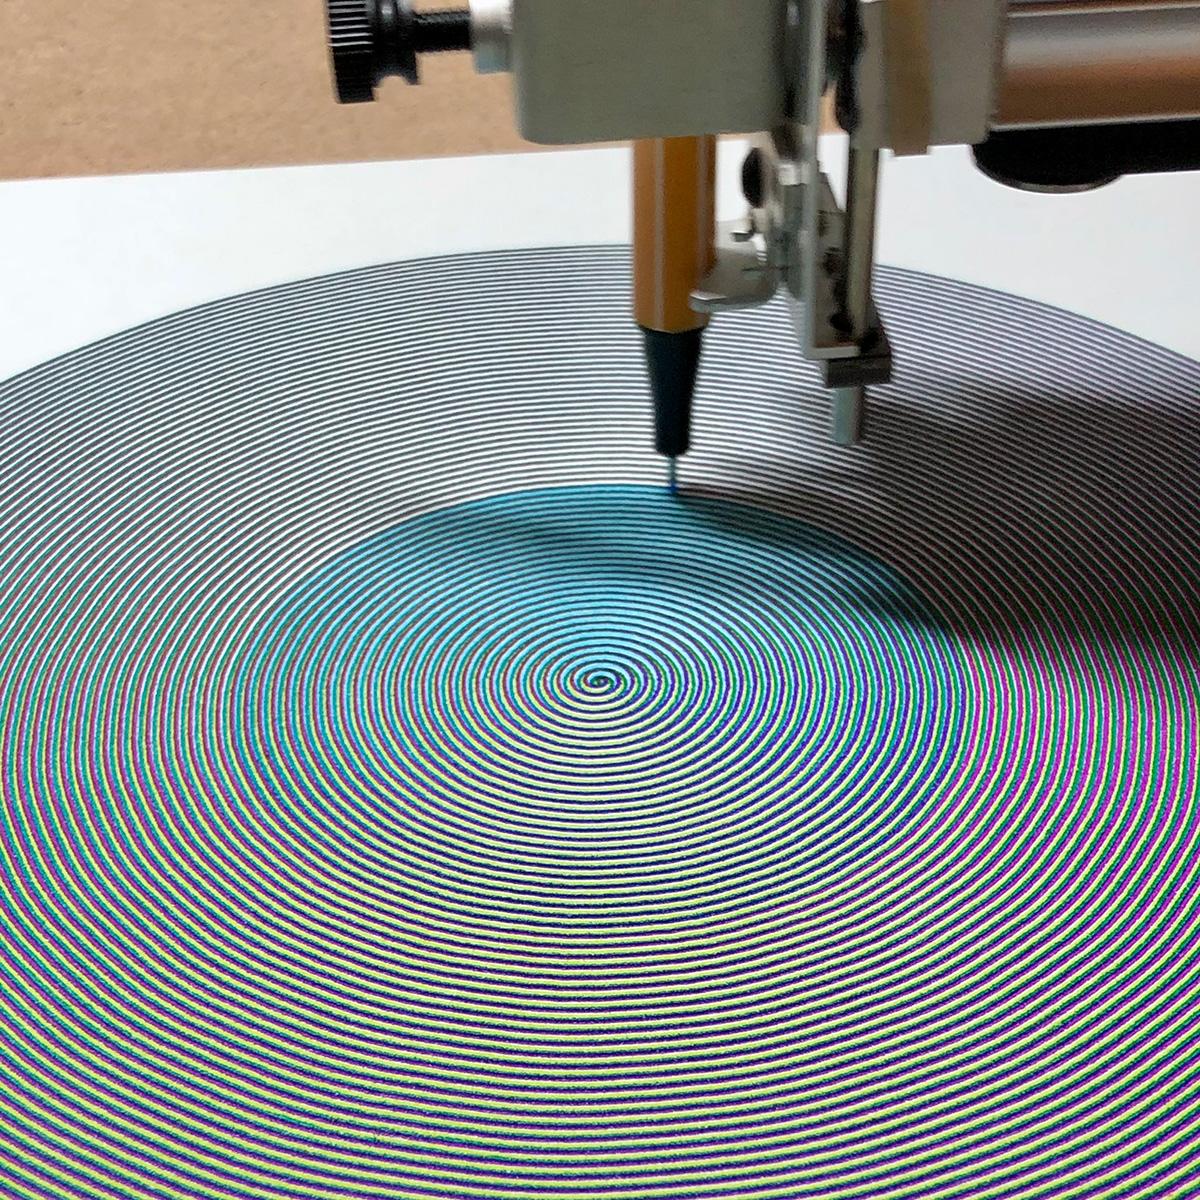 A printing-in-progress shot showing the fourth layer of colour being added